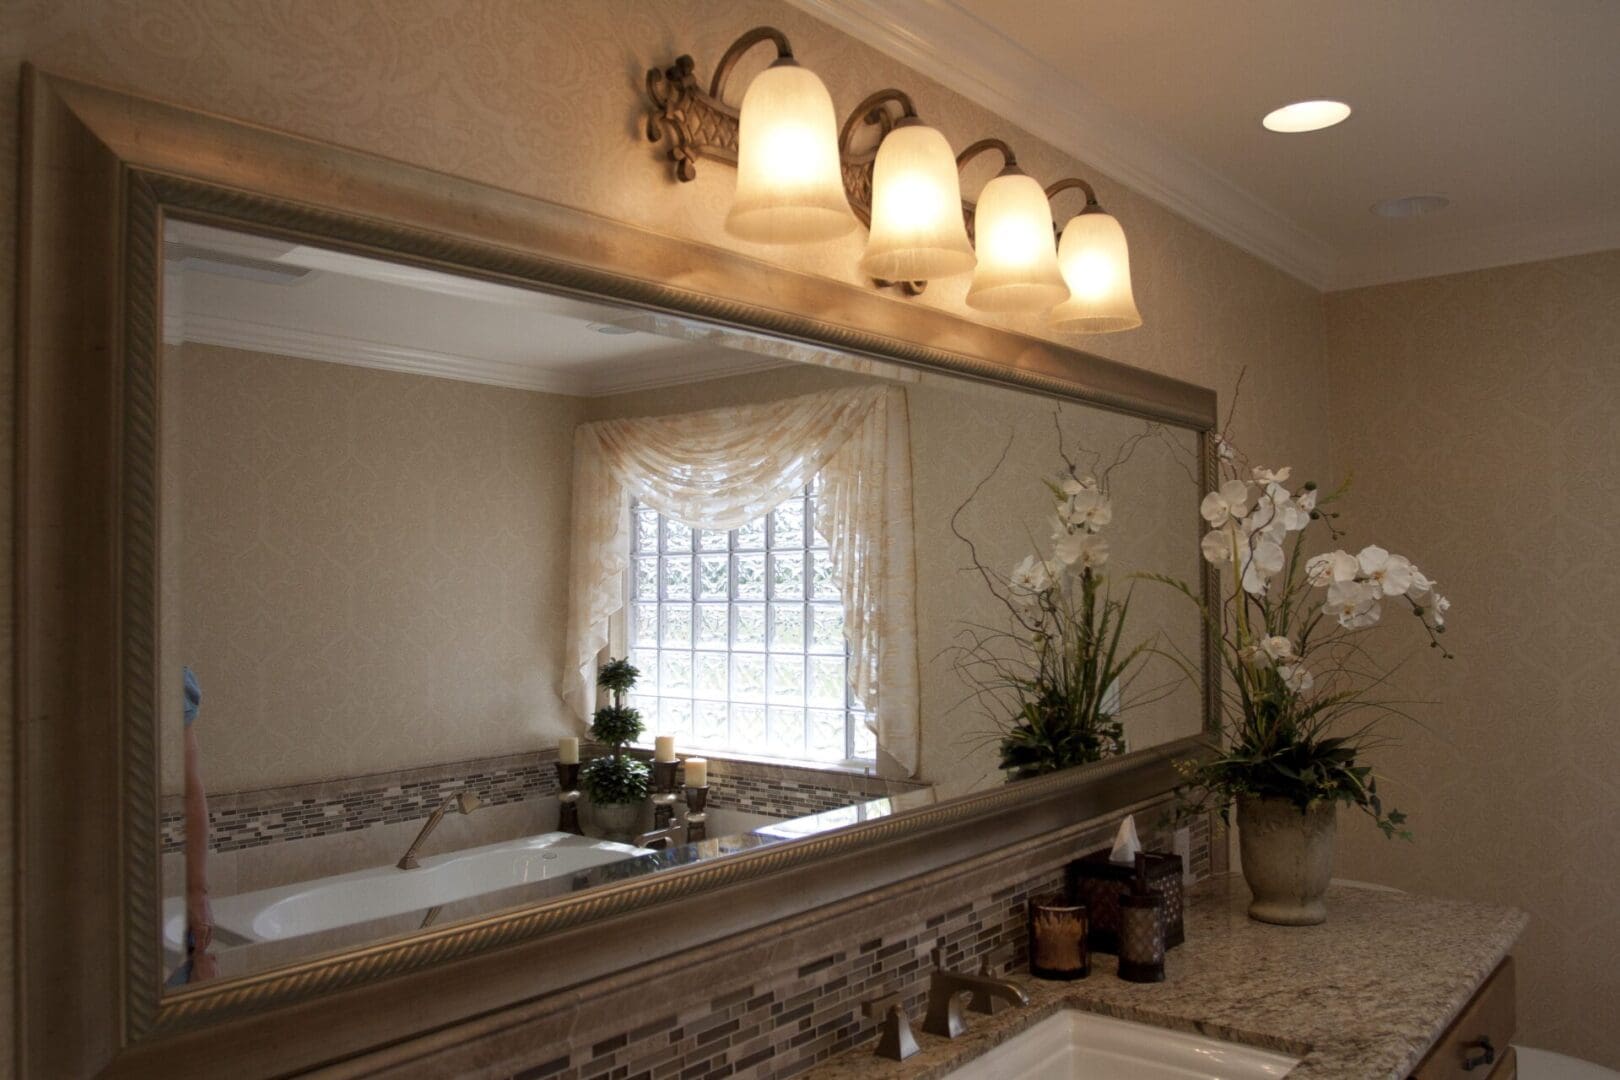 A bathroom with a large mirror and lights above the sink.